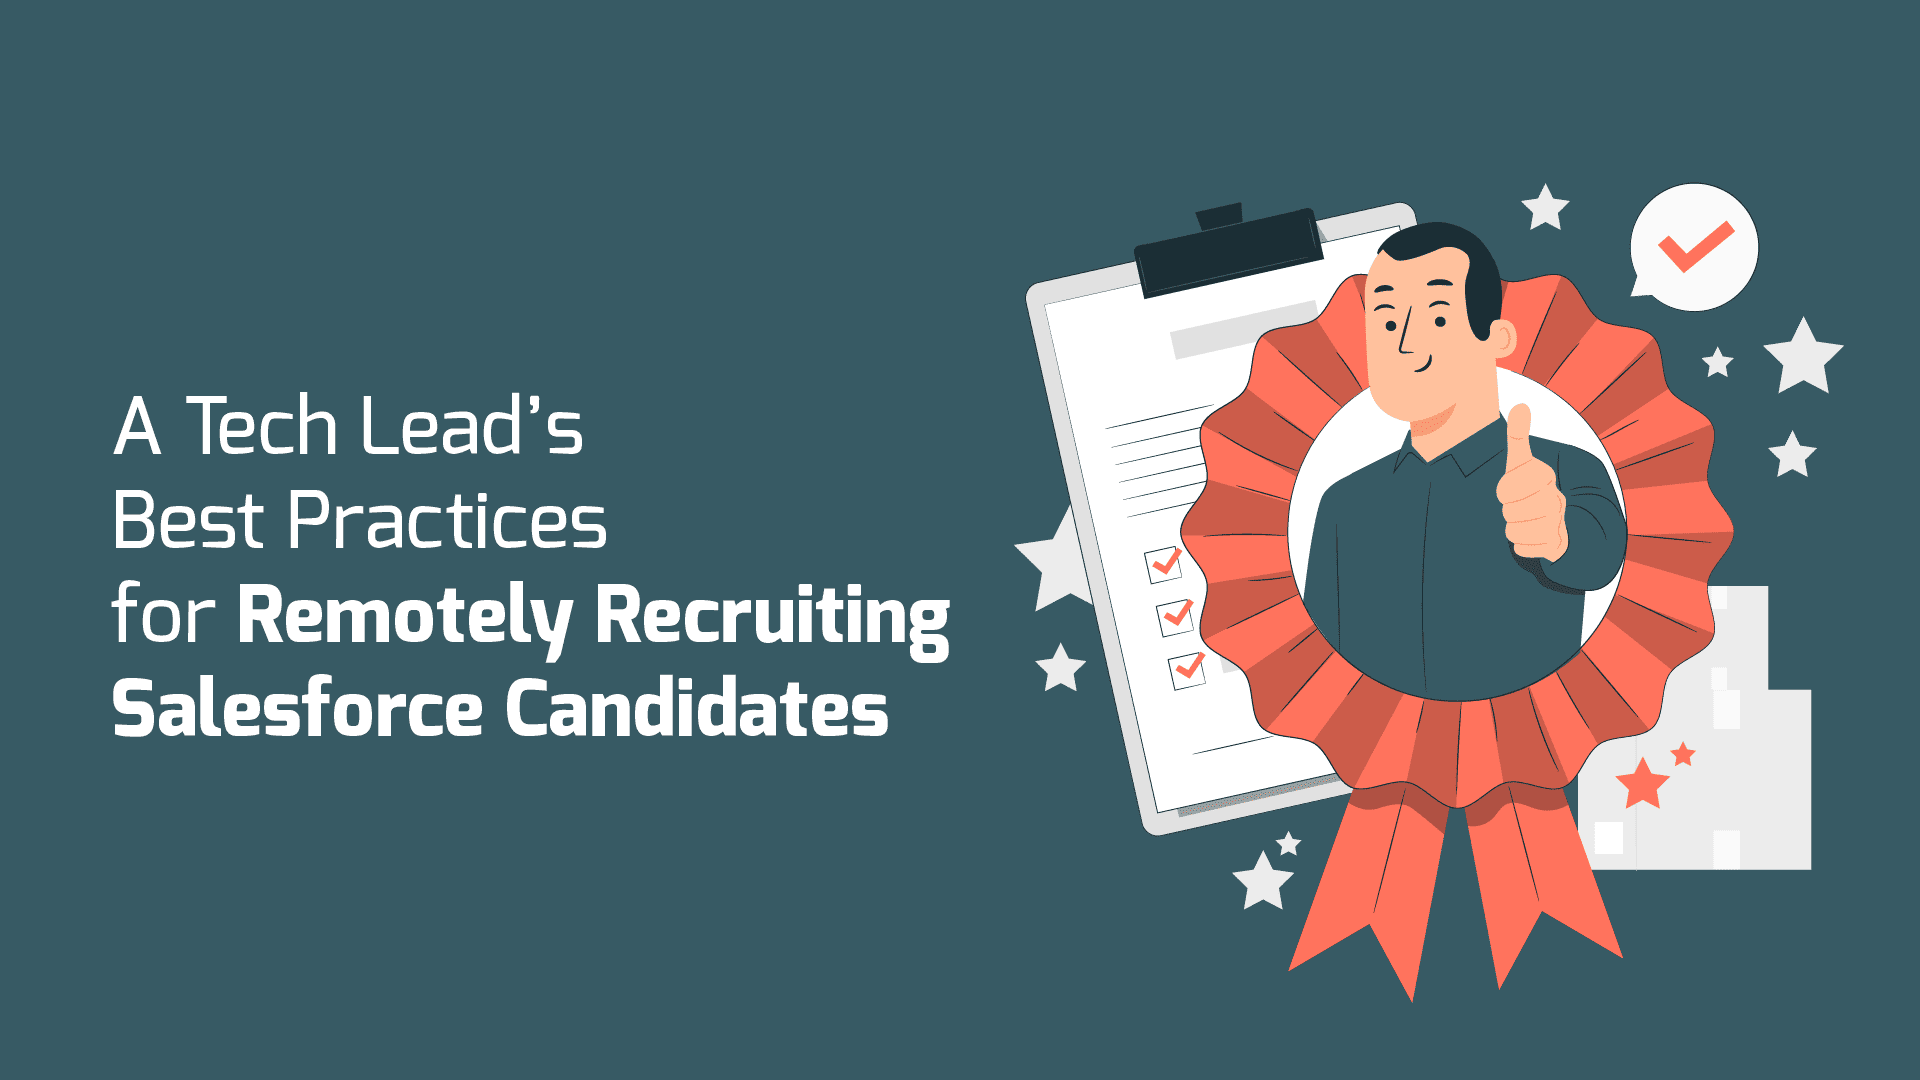 A Tech Lead’s Best Practices for Remotely Recruiting Salesforce Candidates